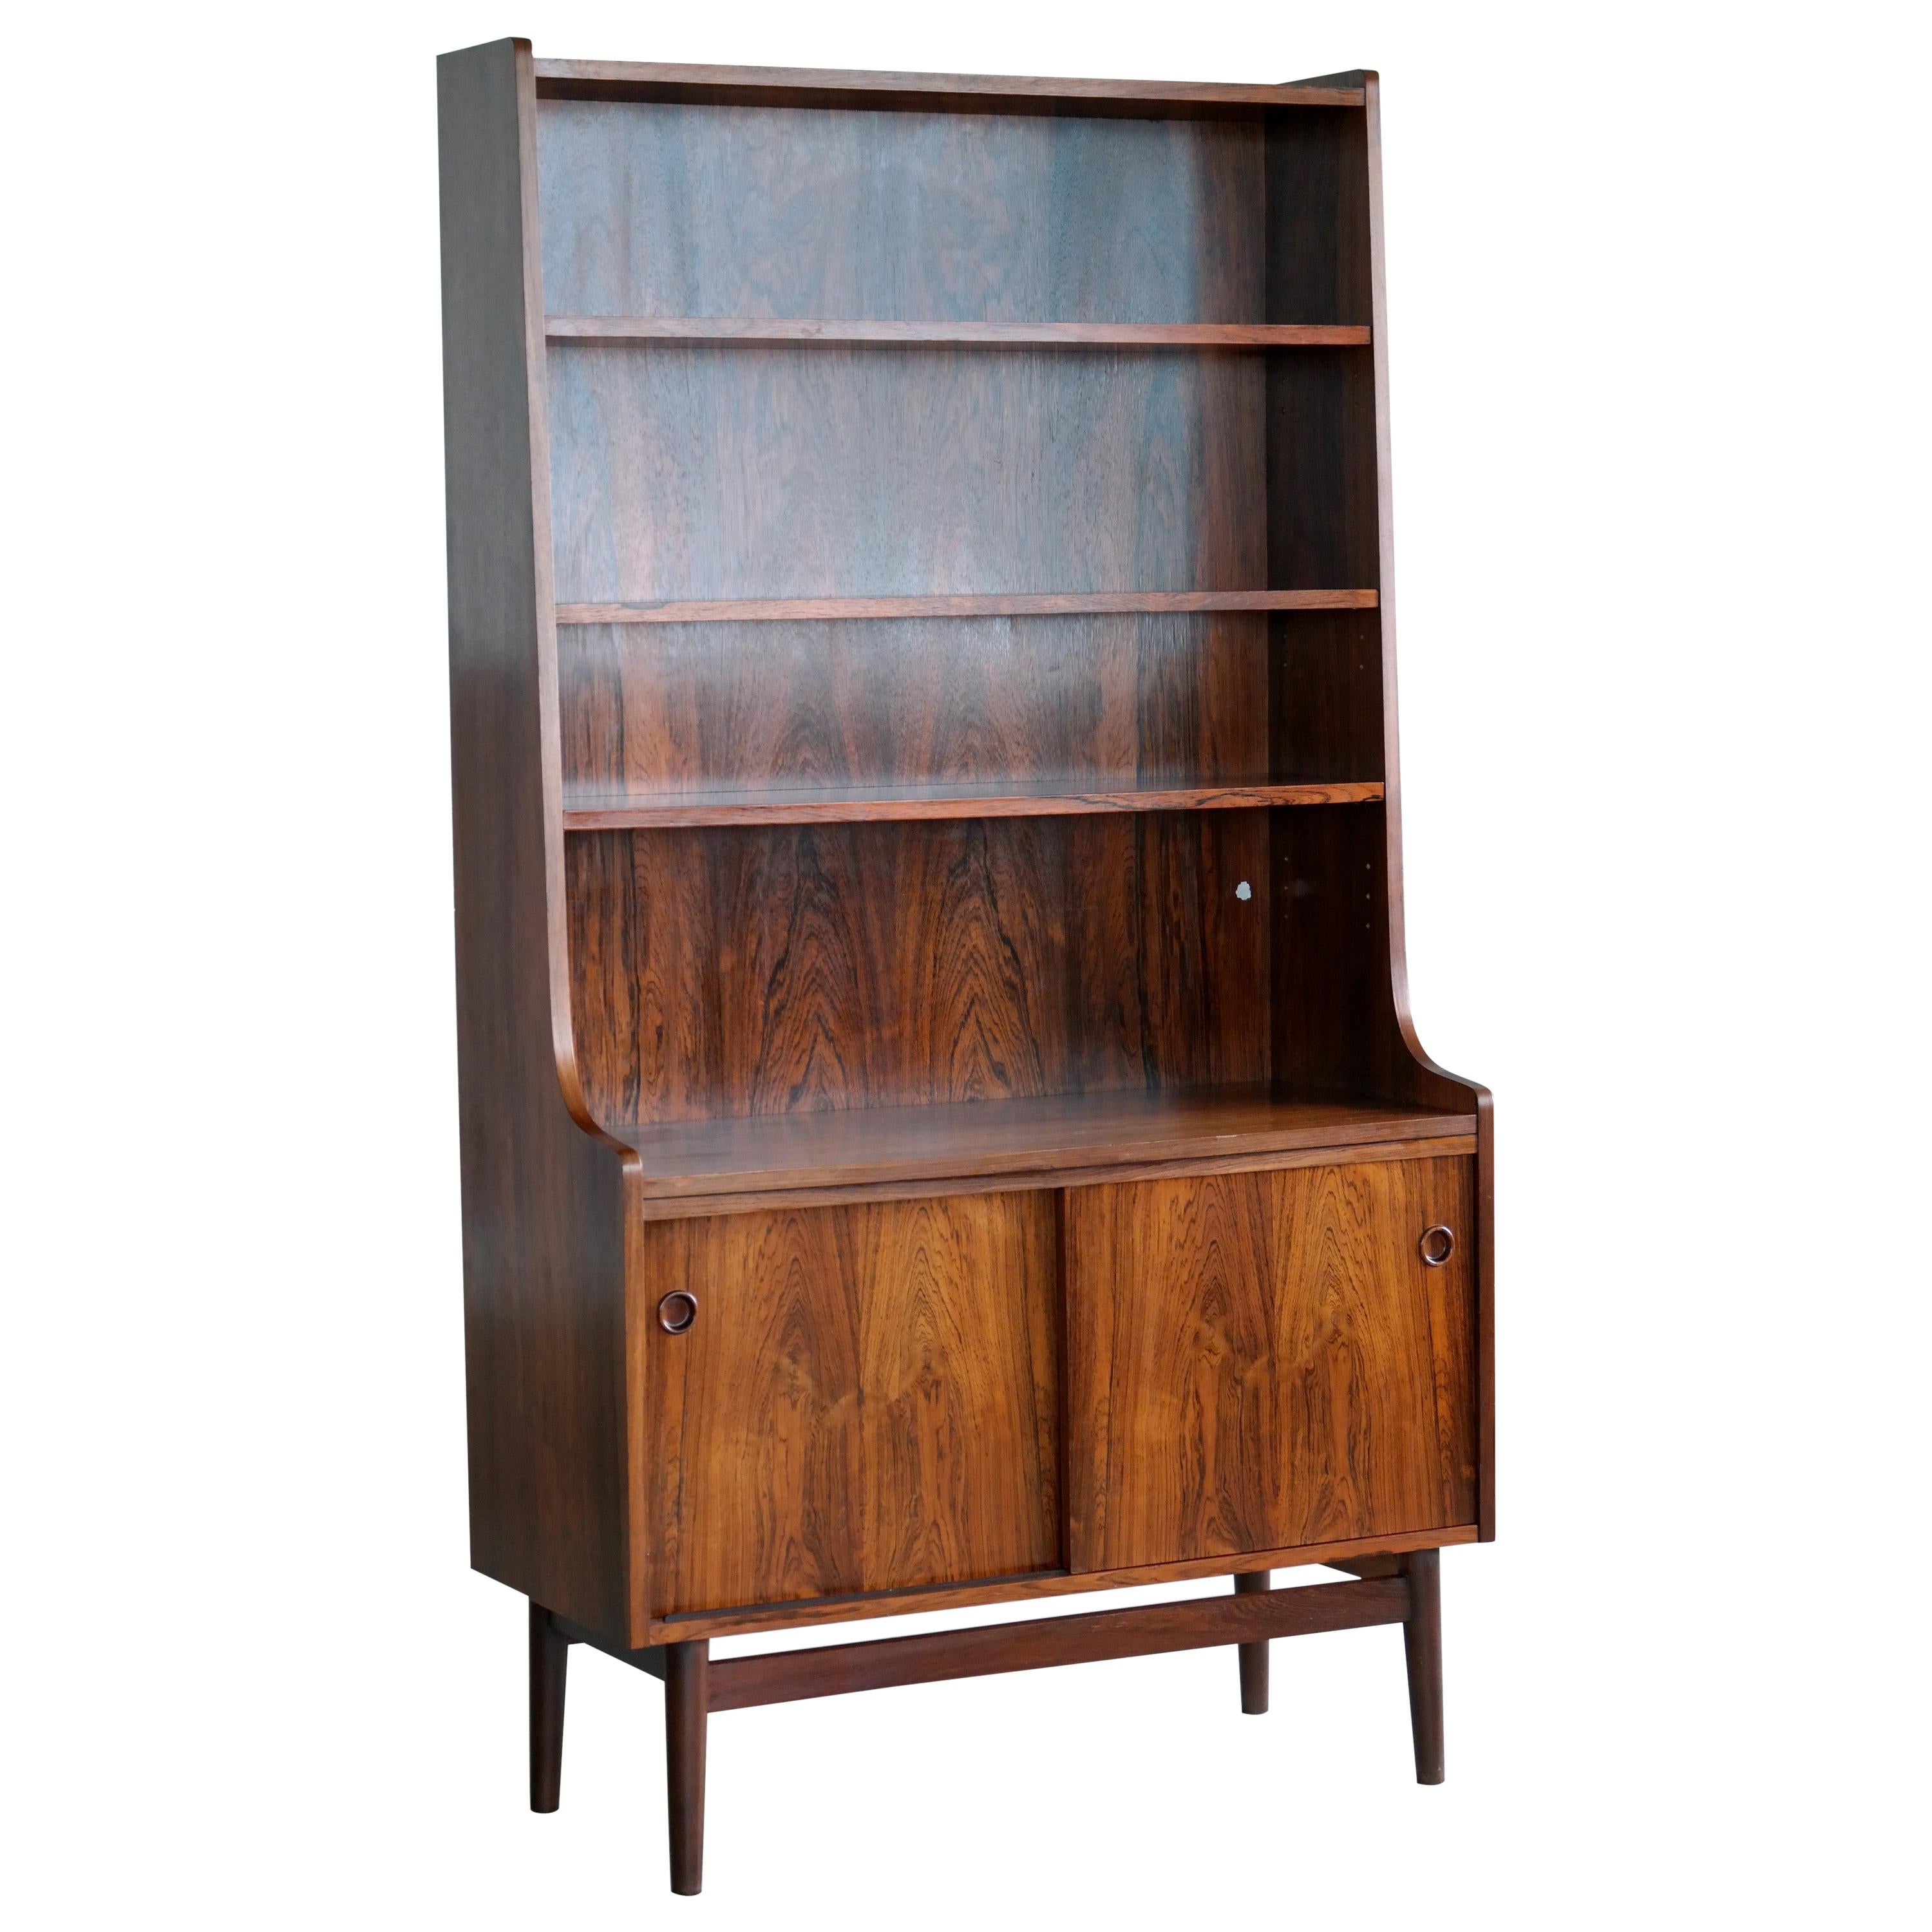 Danish Midcentury Rosewood Bookcase by Johannes Sorth for Bornholm's Mobler